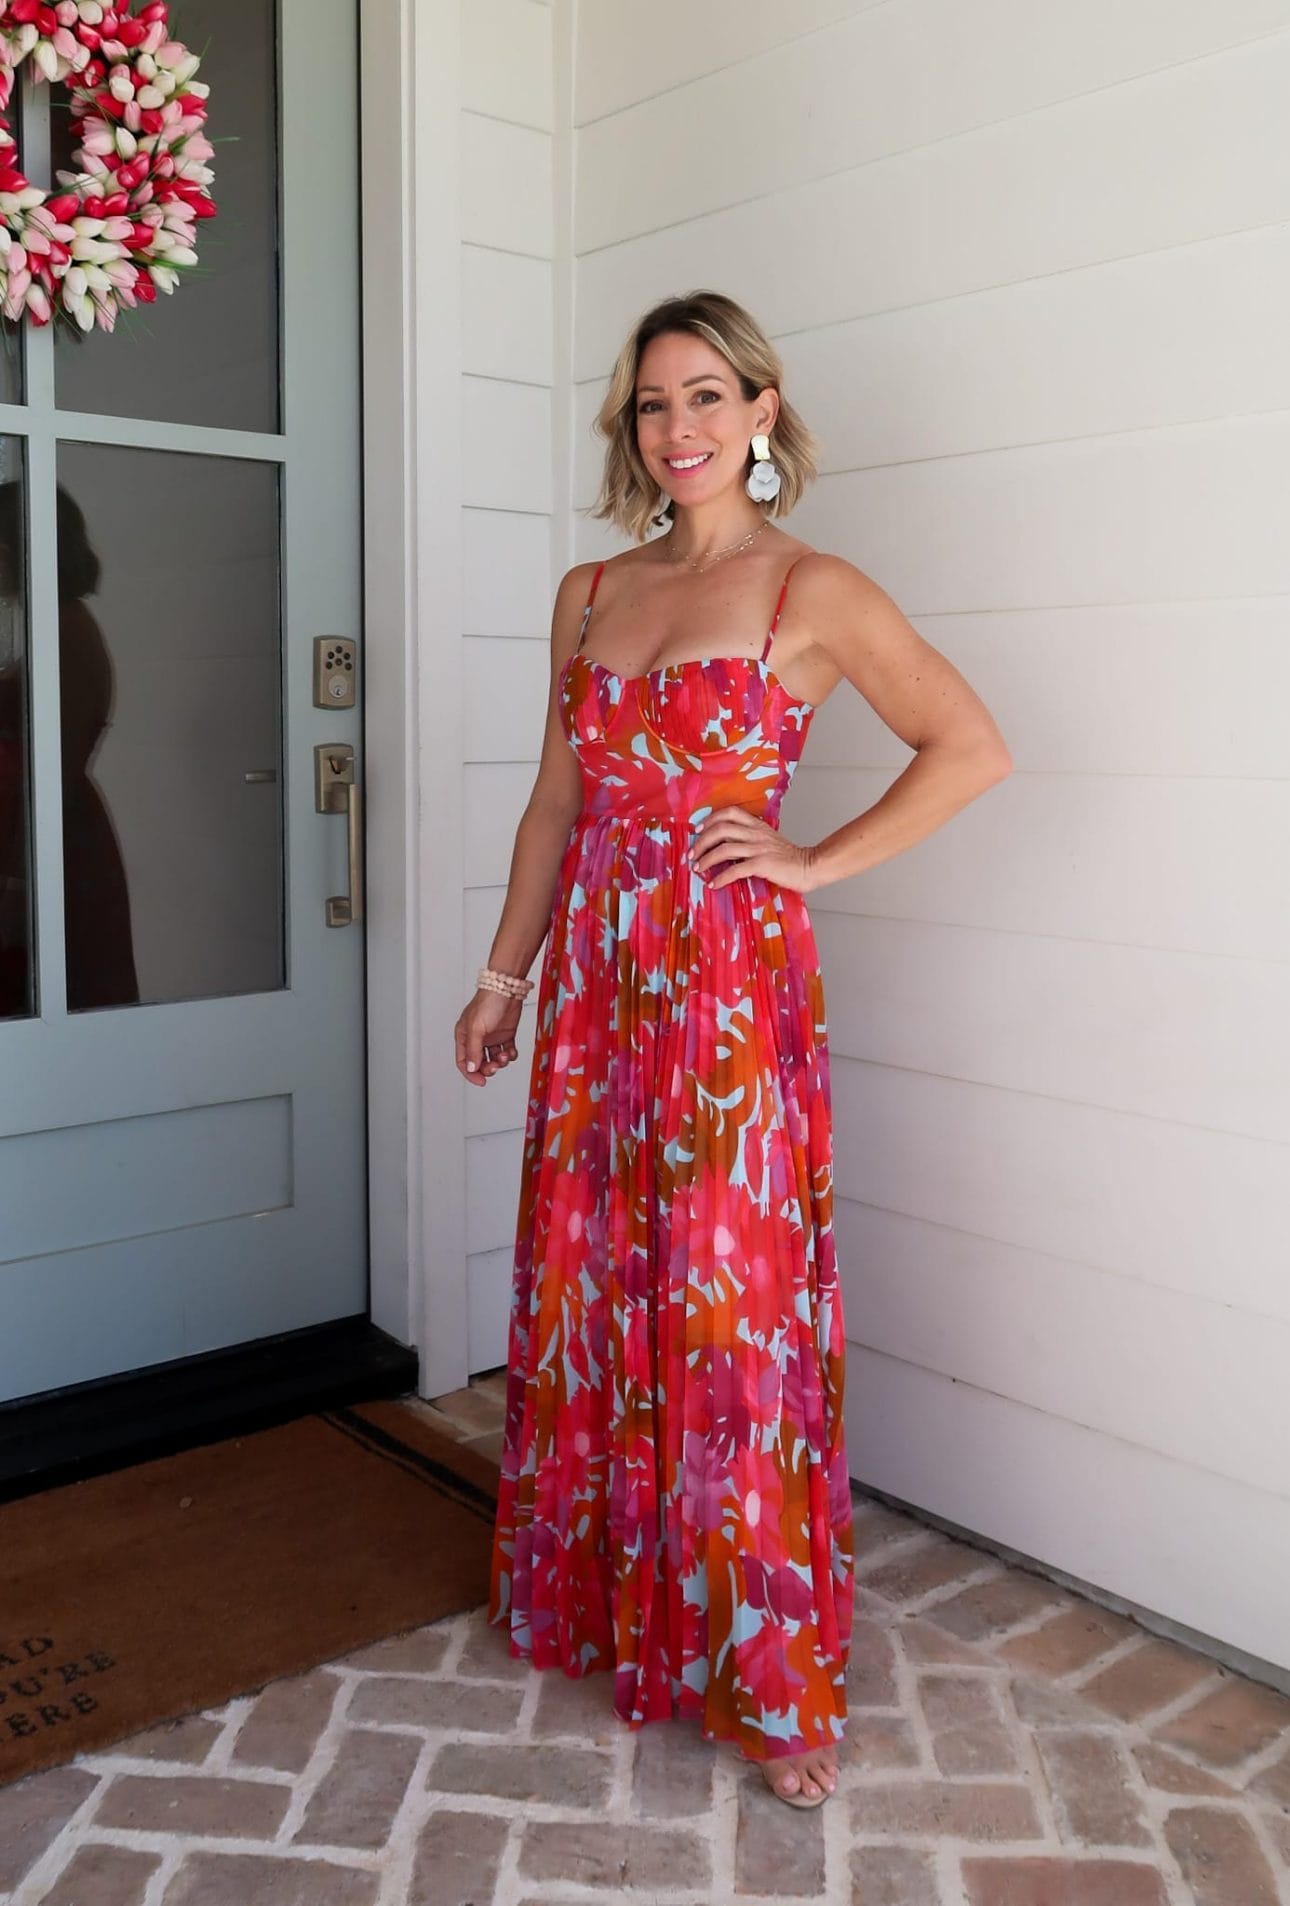 Short Girl's Guide to Wearing Long Dresses • Honey We're Home